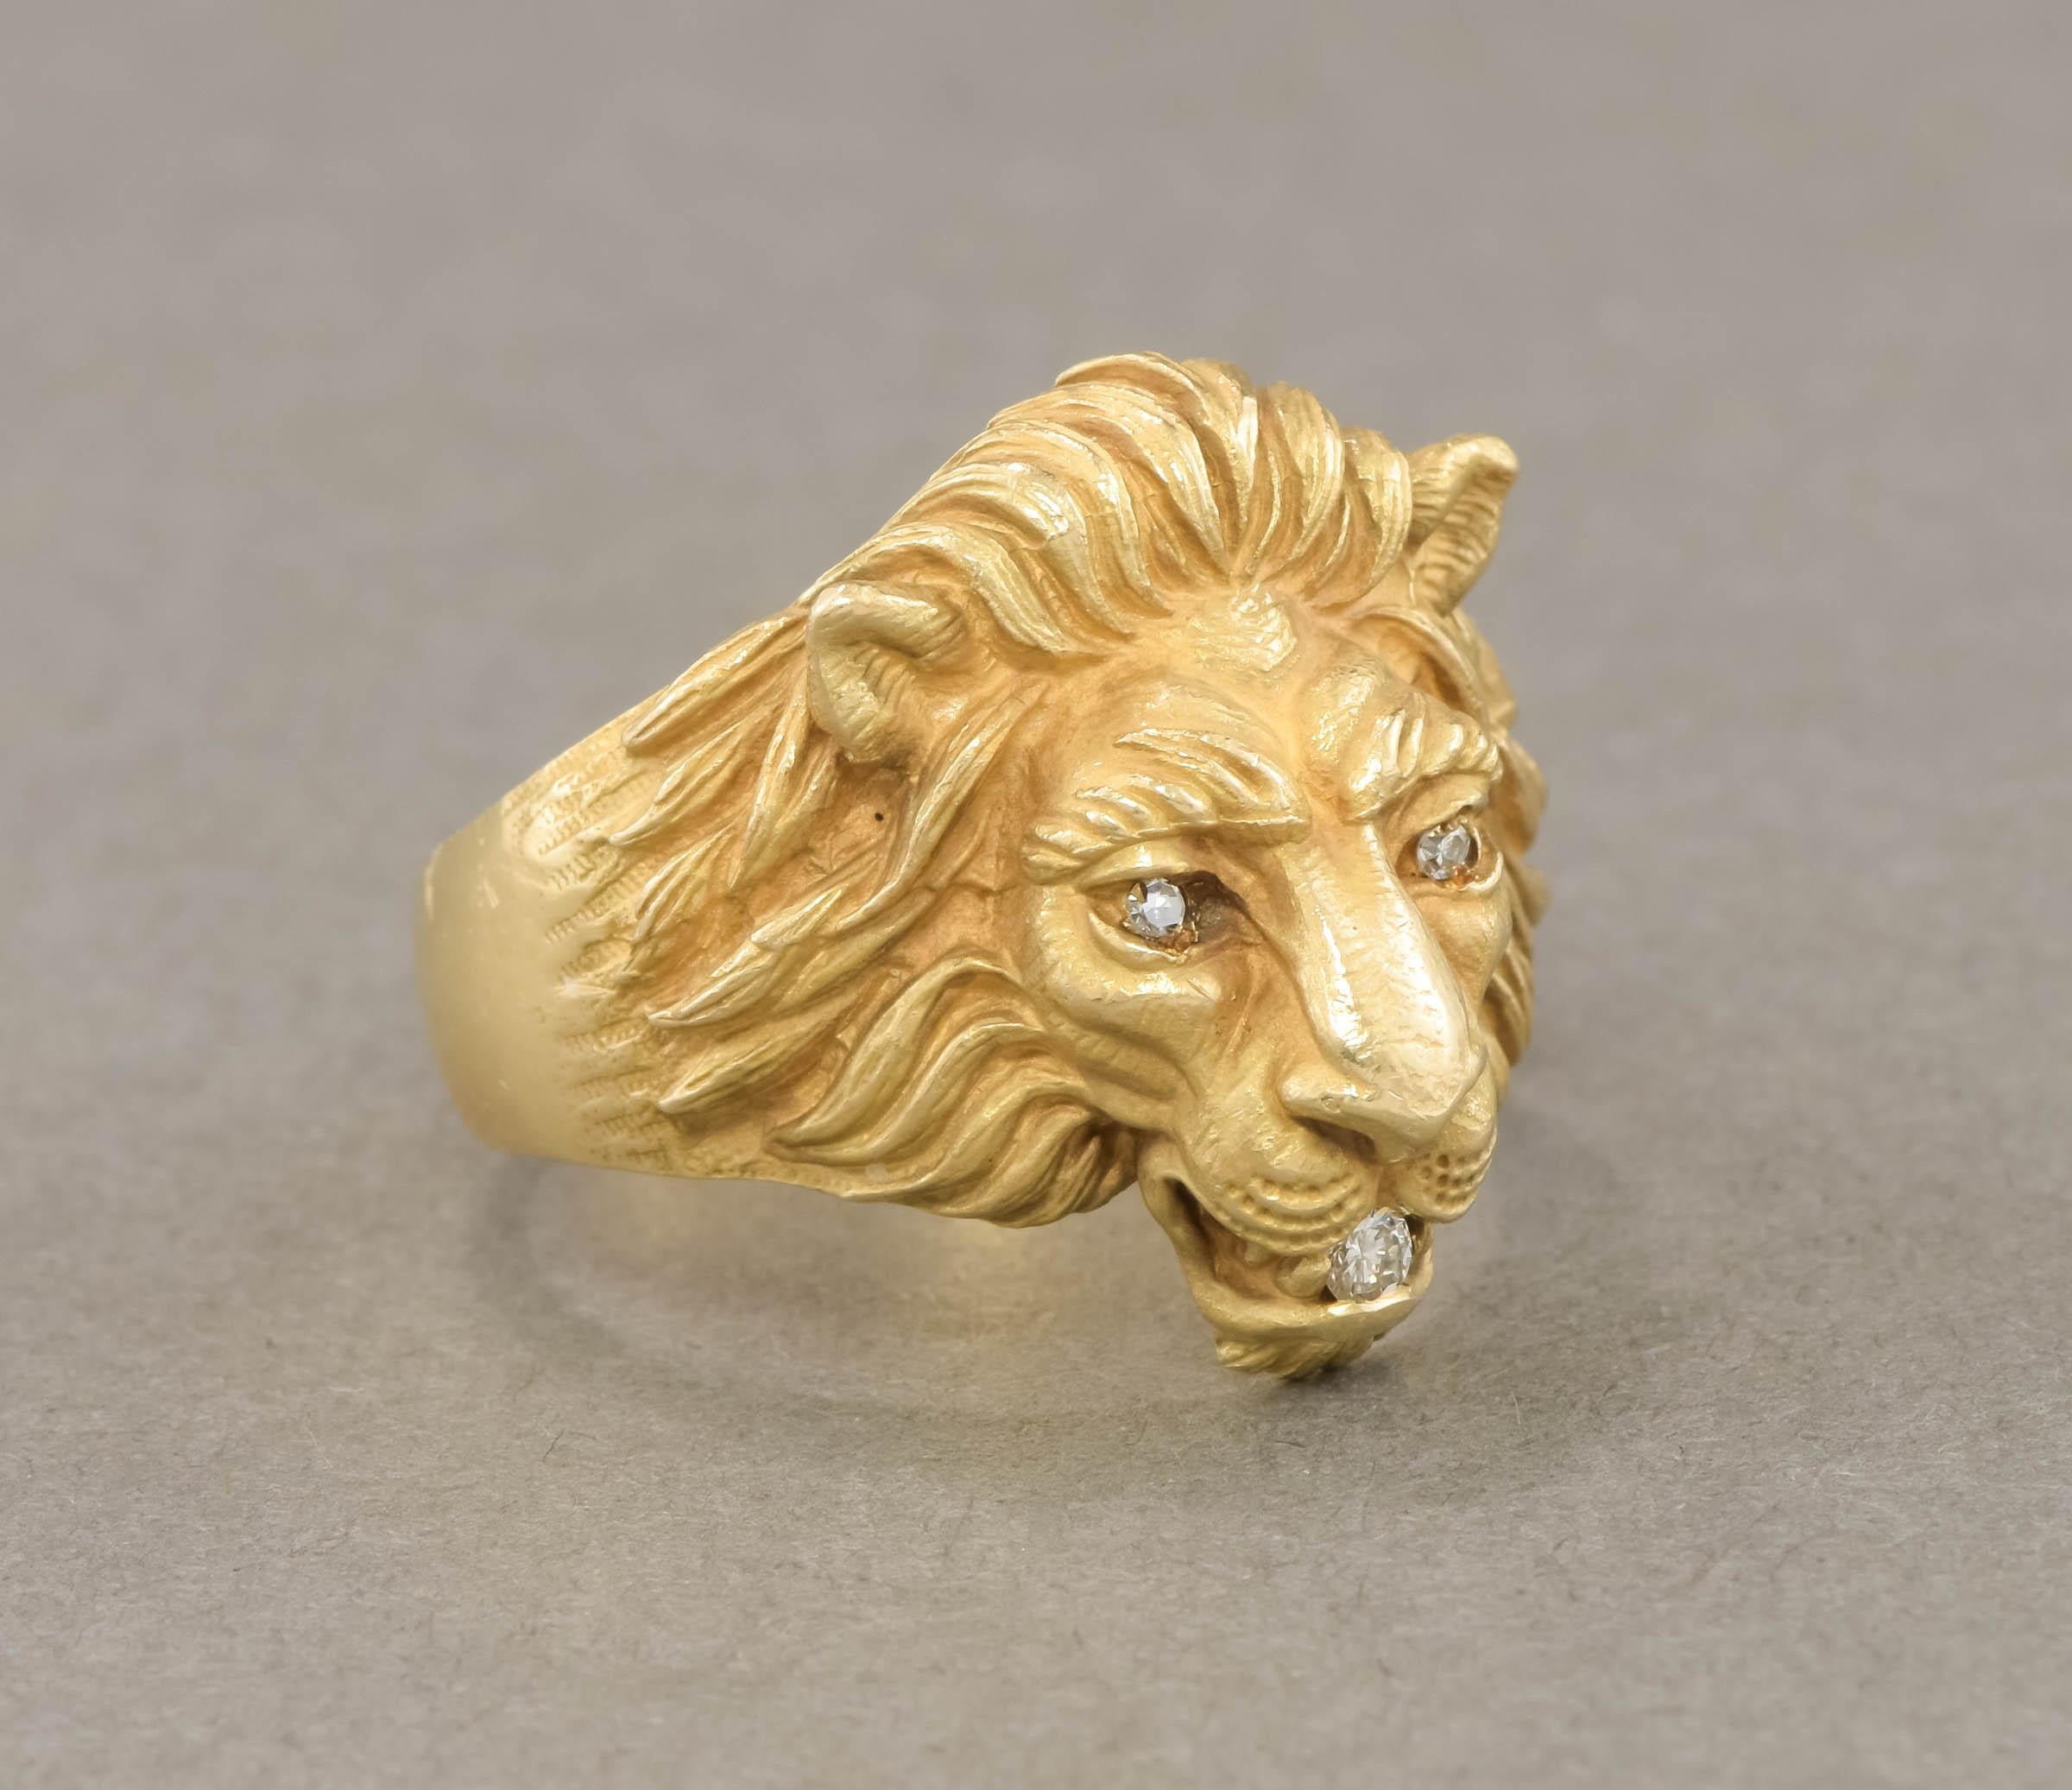 Heavy Detailed Gold Lion Ring with Diamonds by Baumstein Feder, circa 1950'S For Sale 2